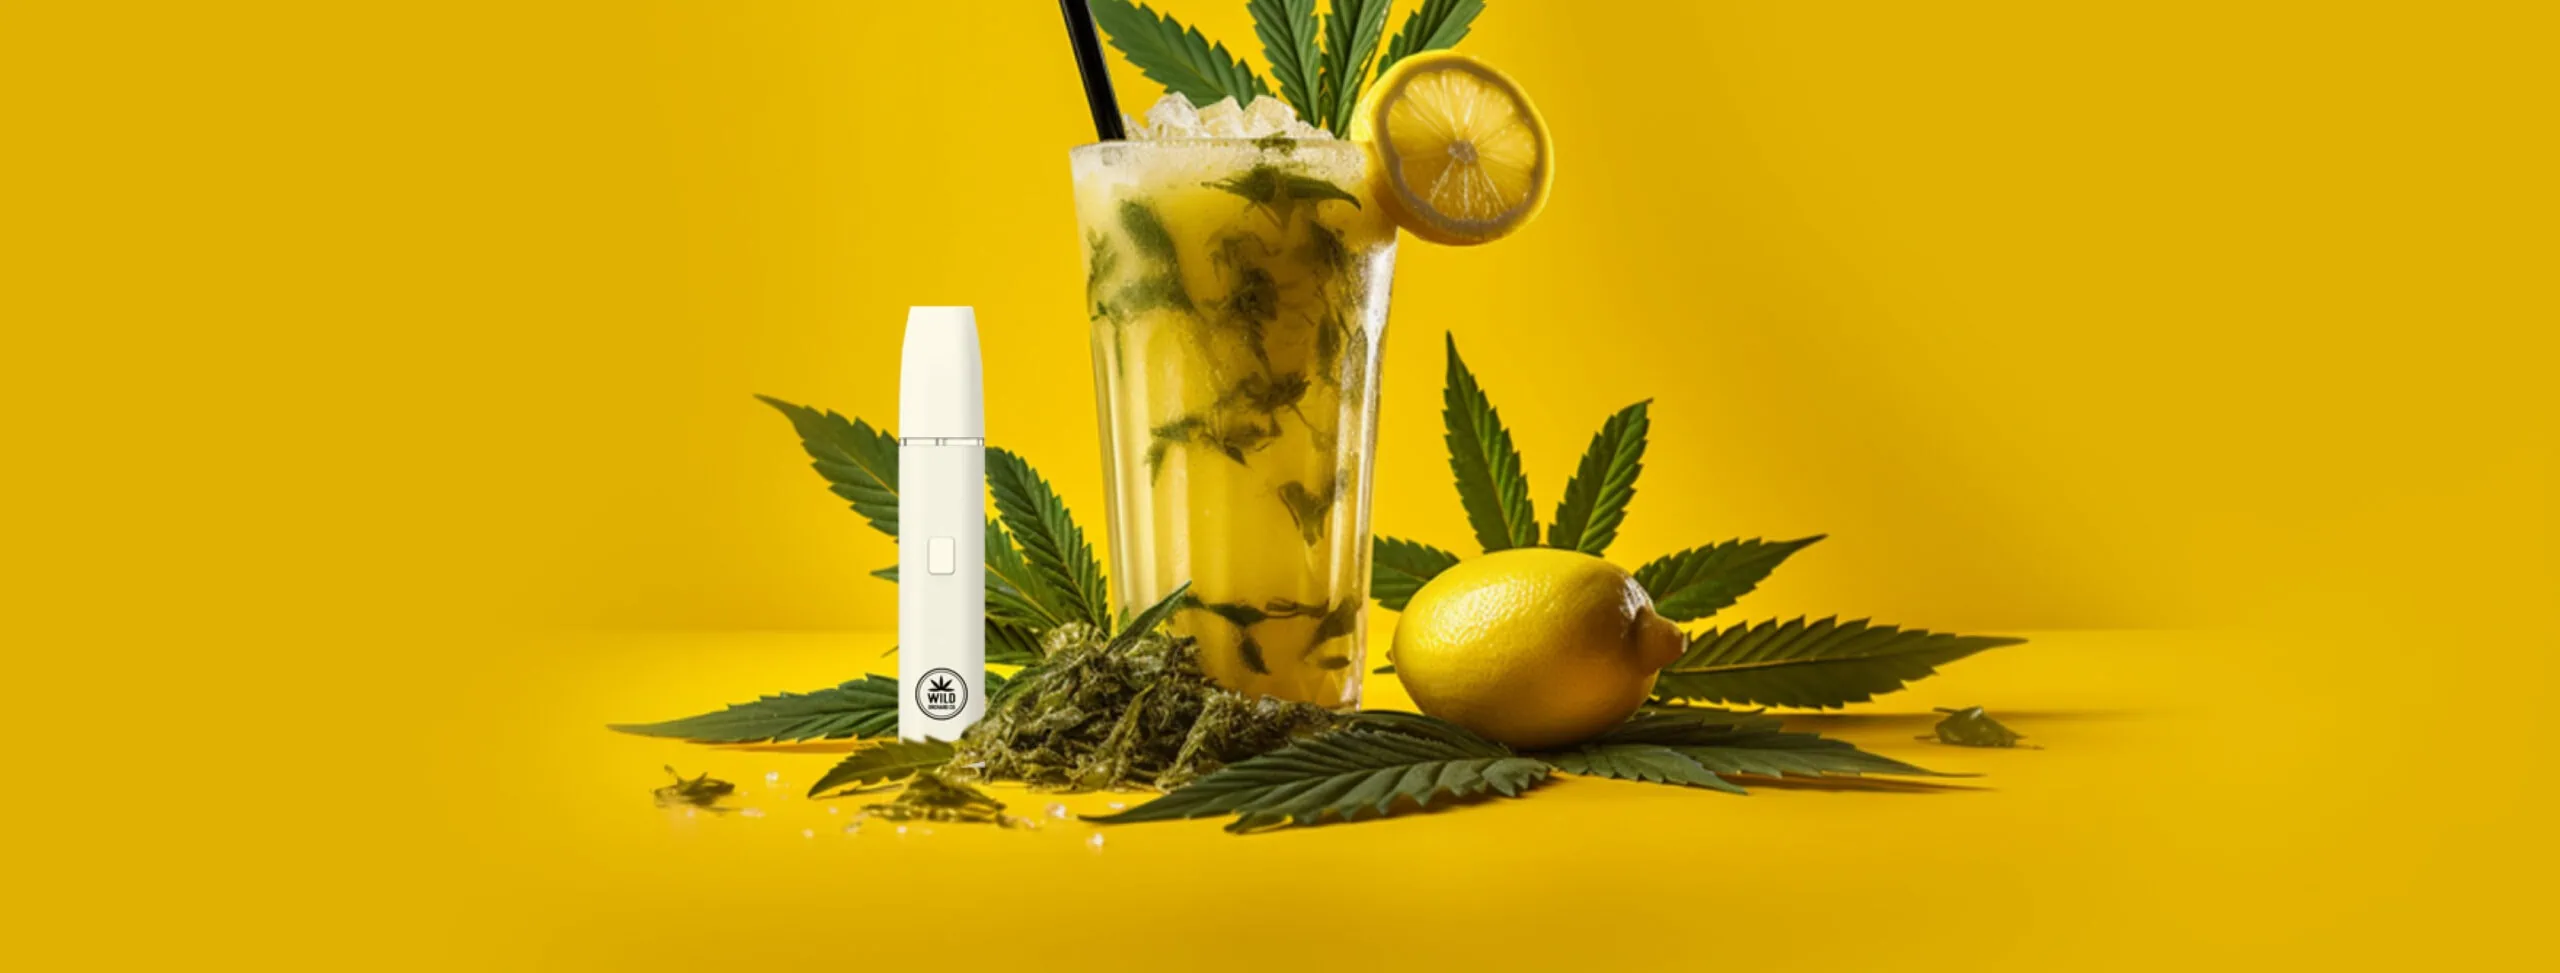 A glass of lemonade with marijuana leaves and a CBD vape pen, frequently featured in our FAQ section where we provide answers to common questions.